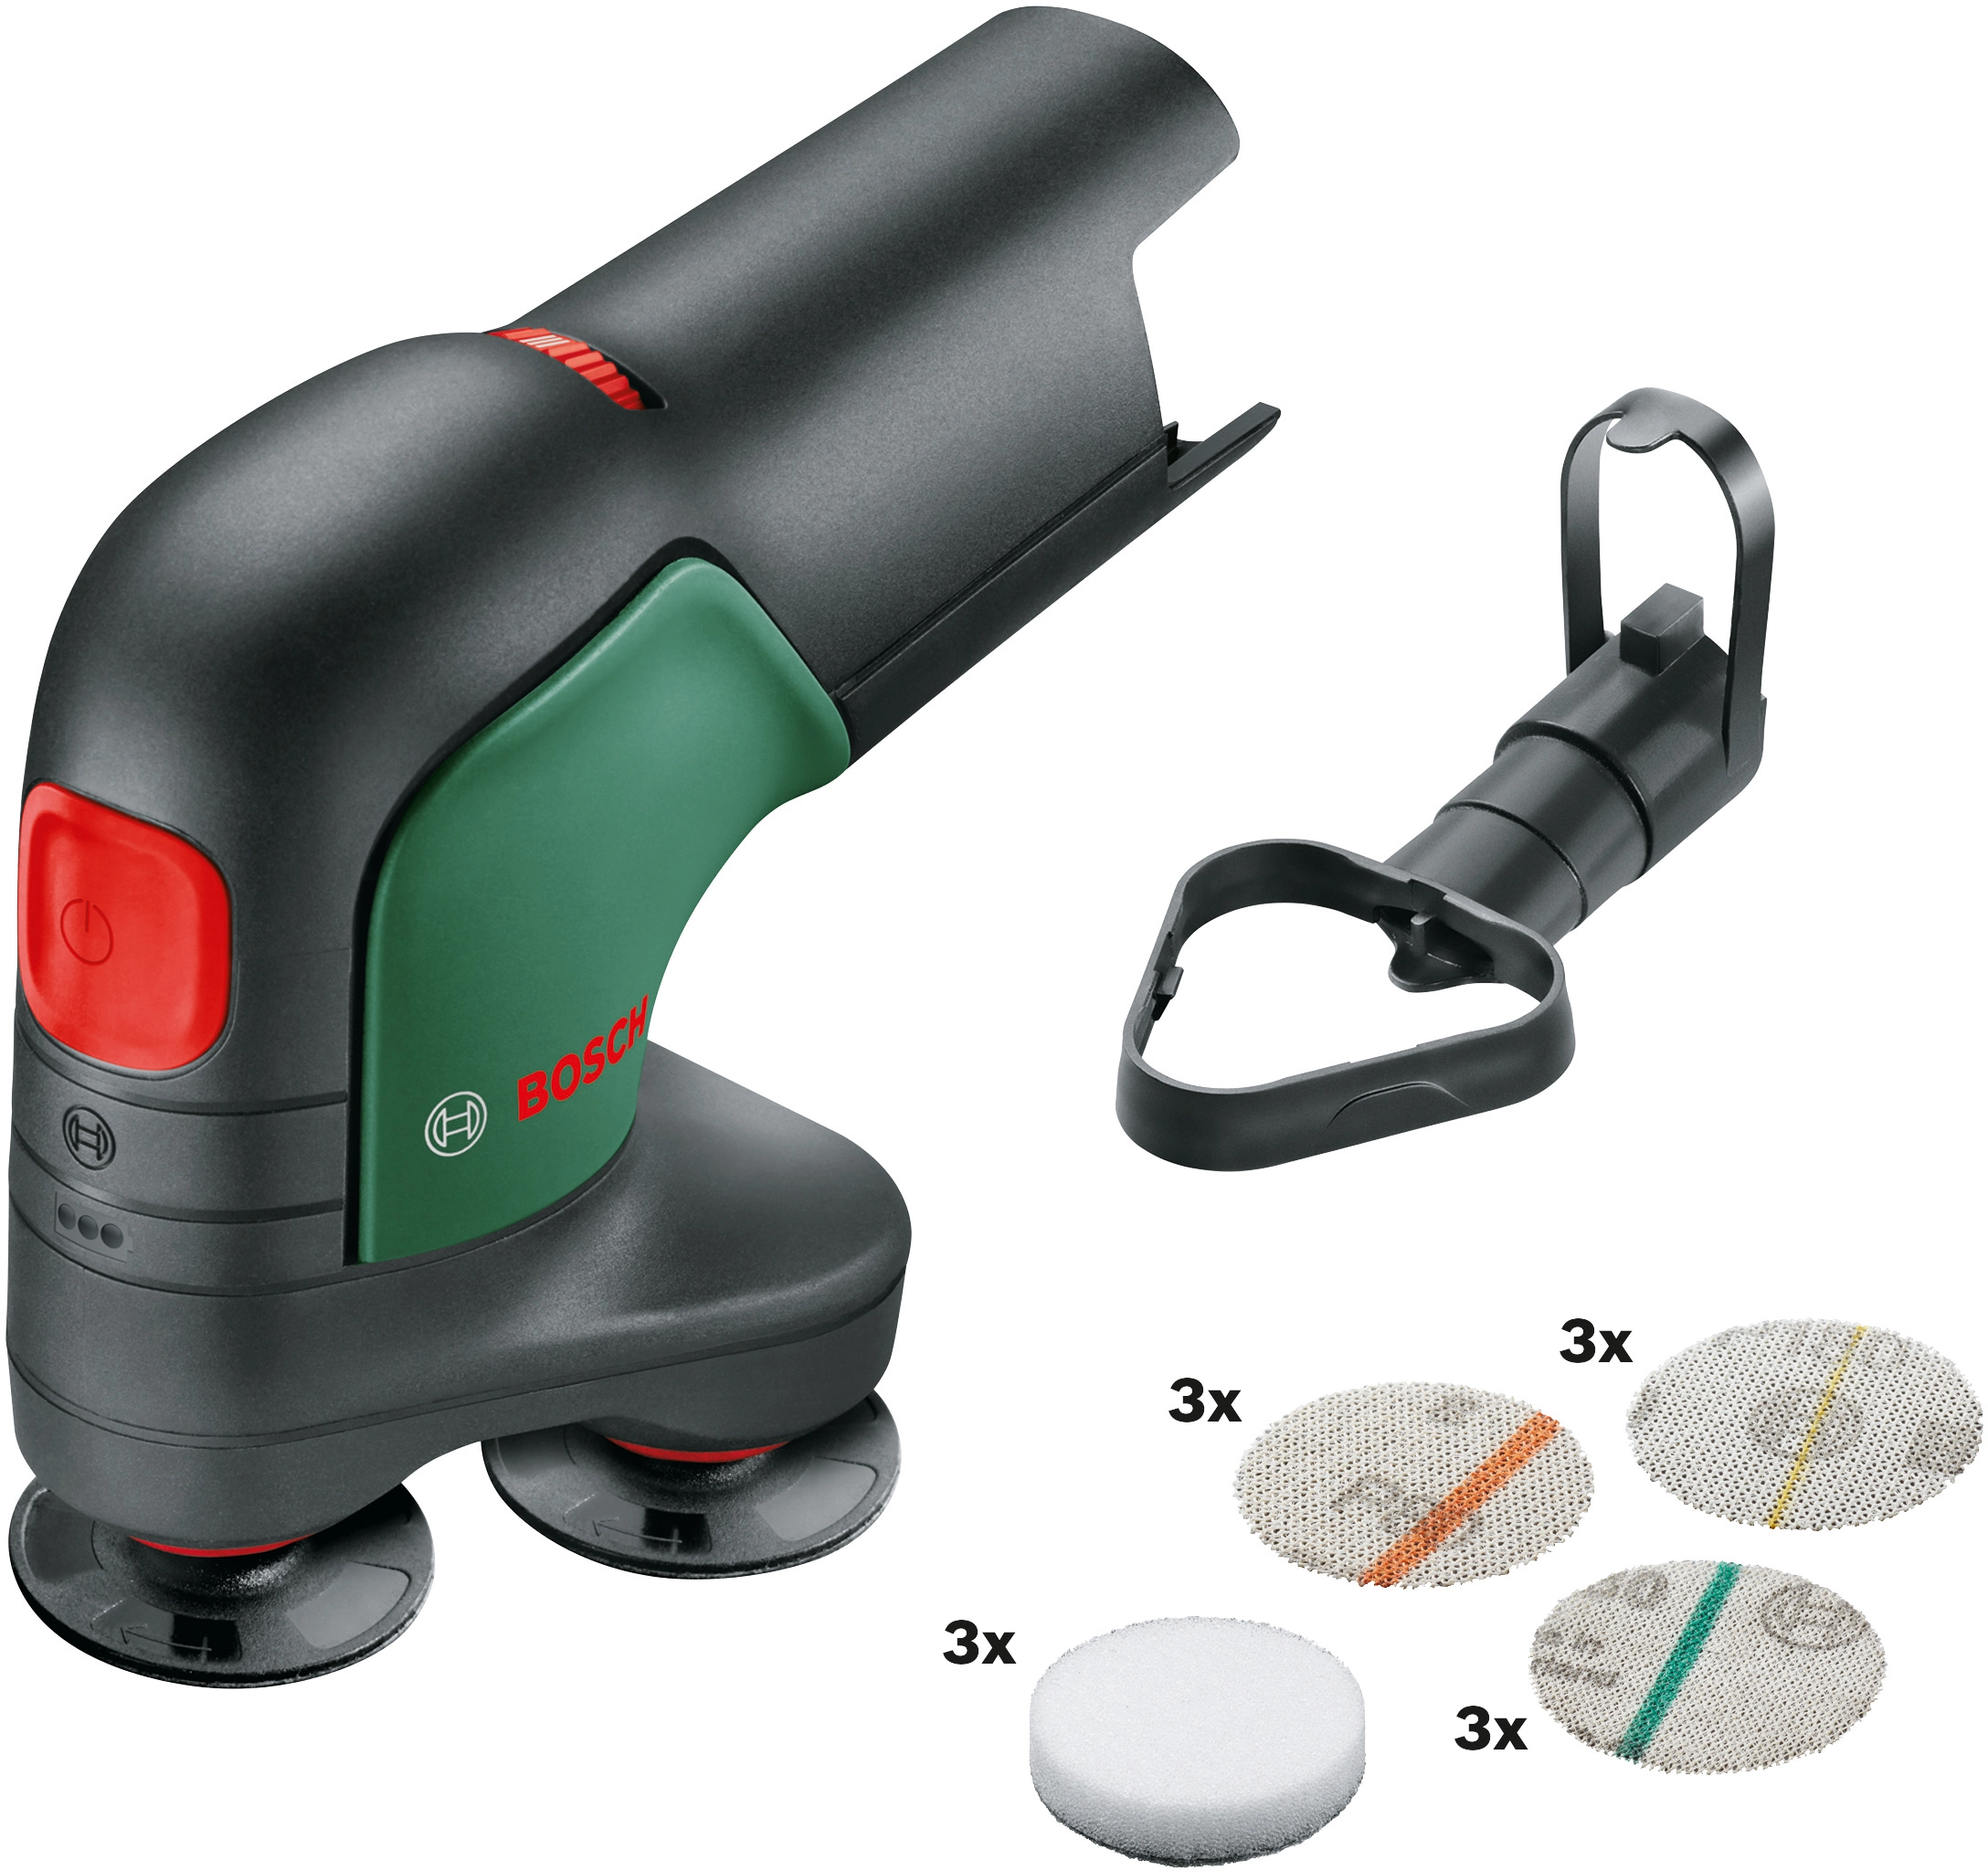 Ponceuse multifonction Bosch Texoro 